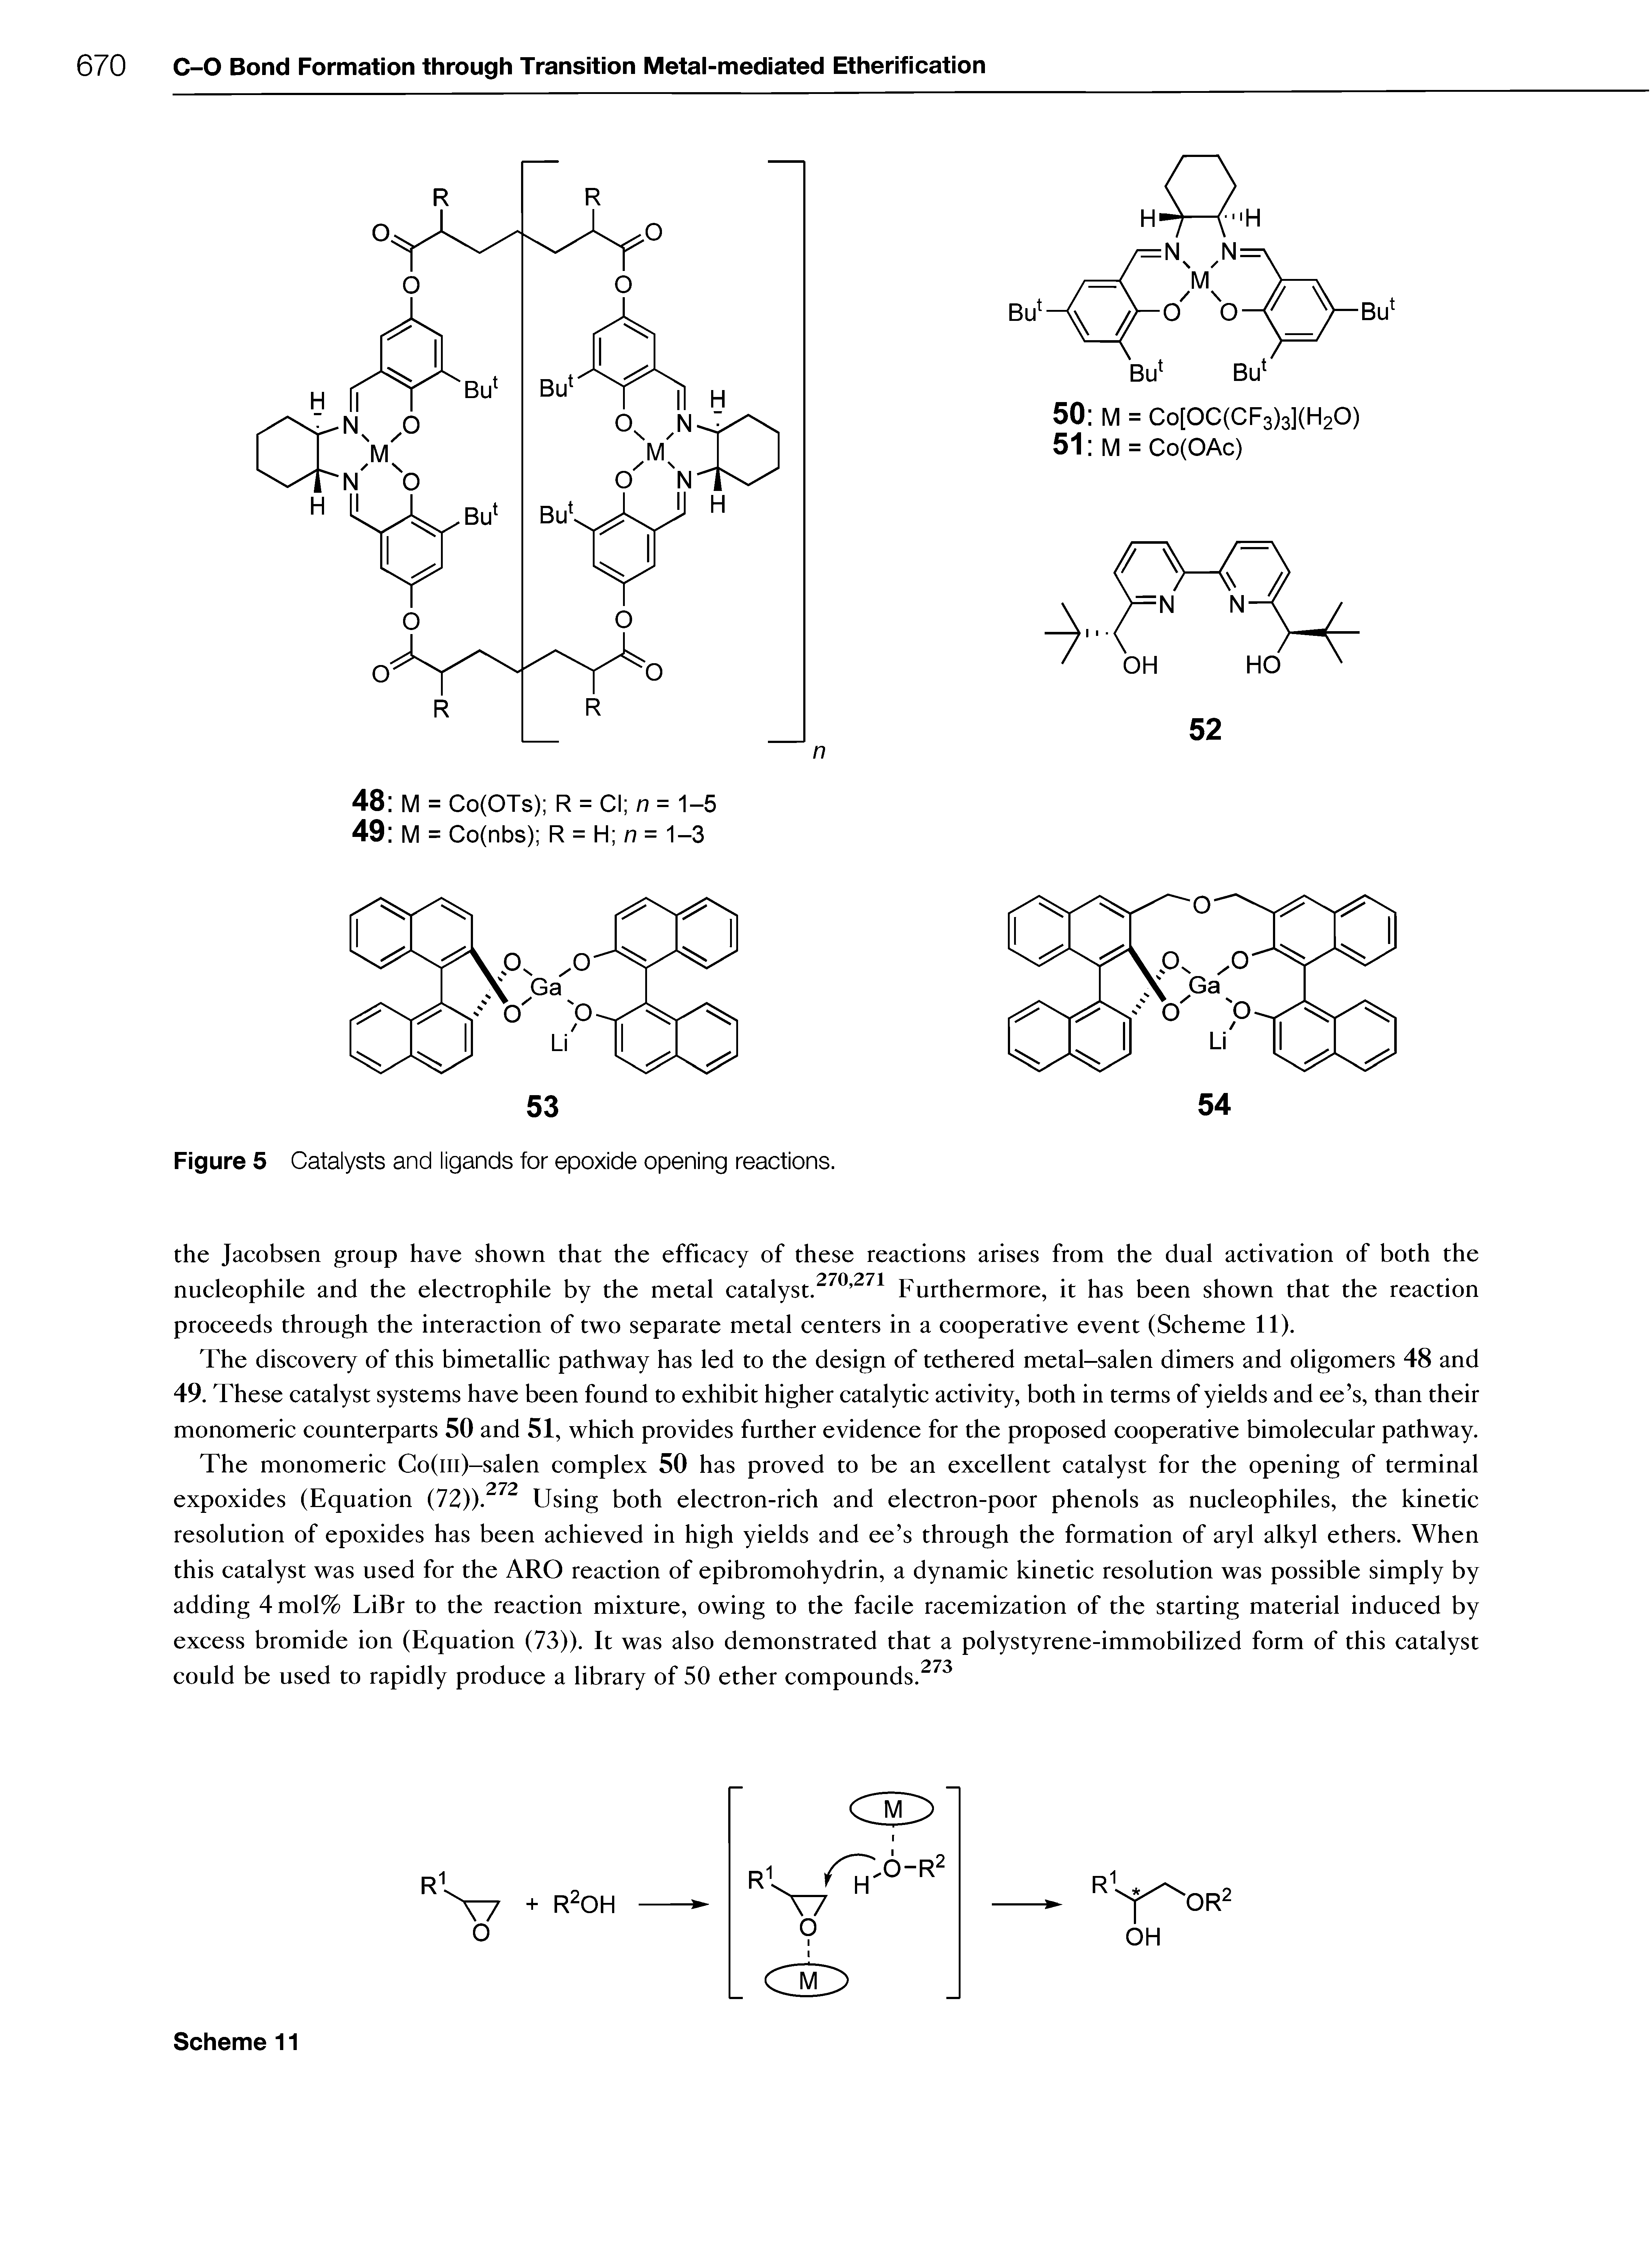 Figure 5 Catalysts and ligands for epoxide opening reactions.